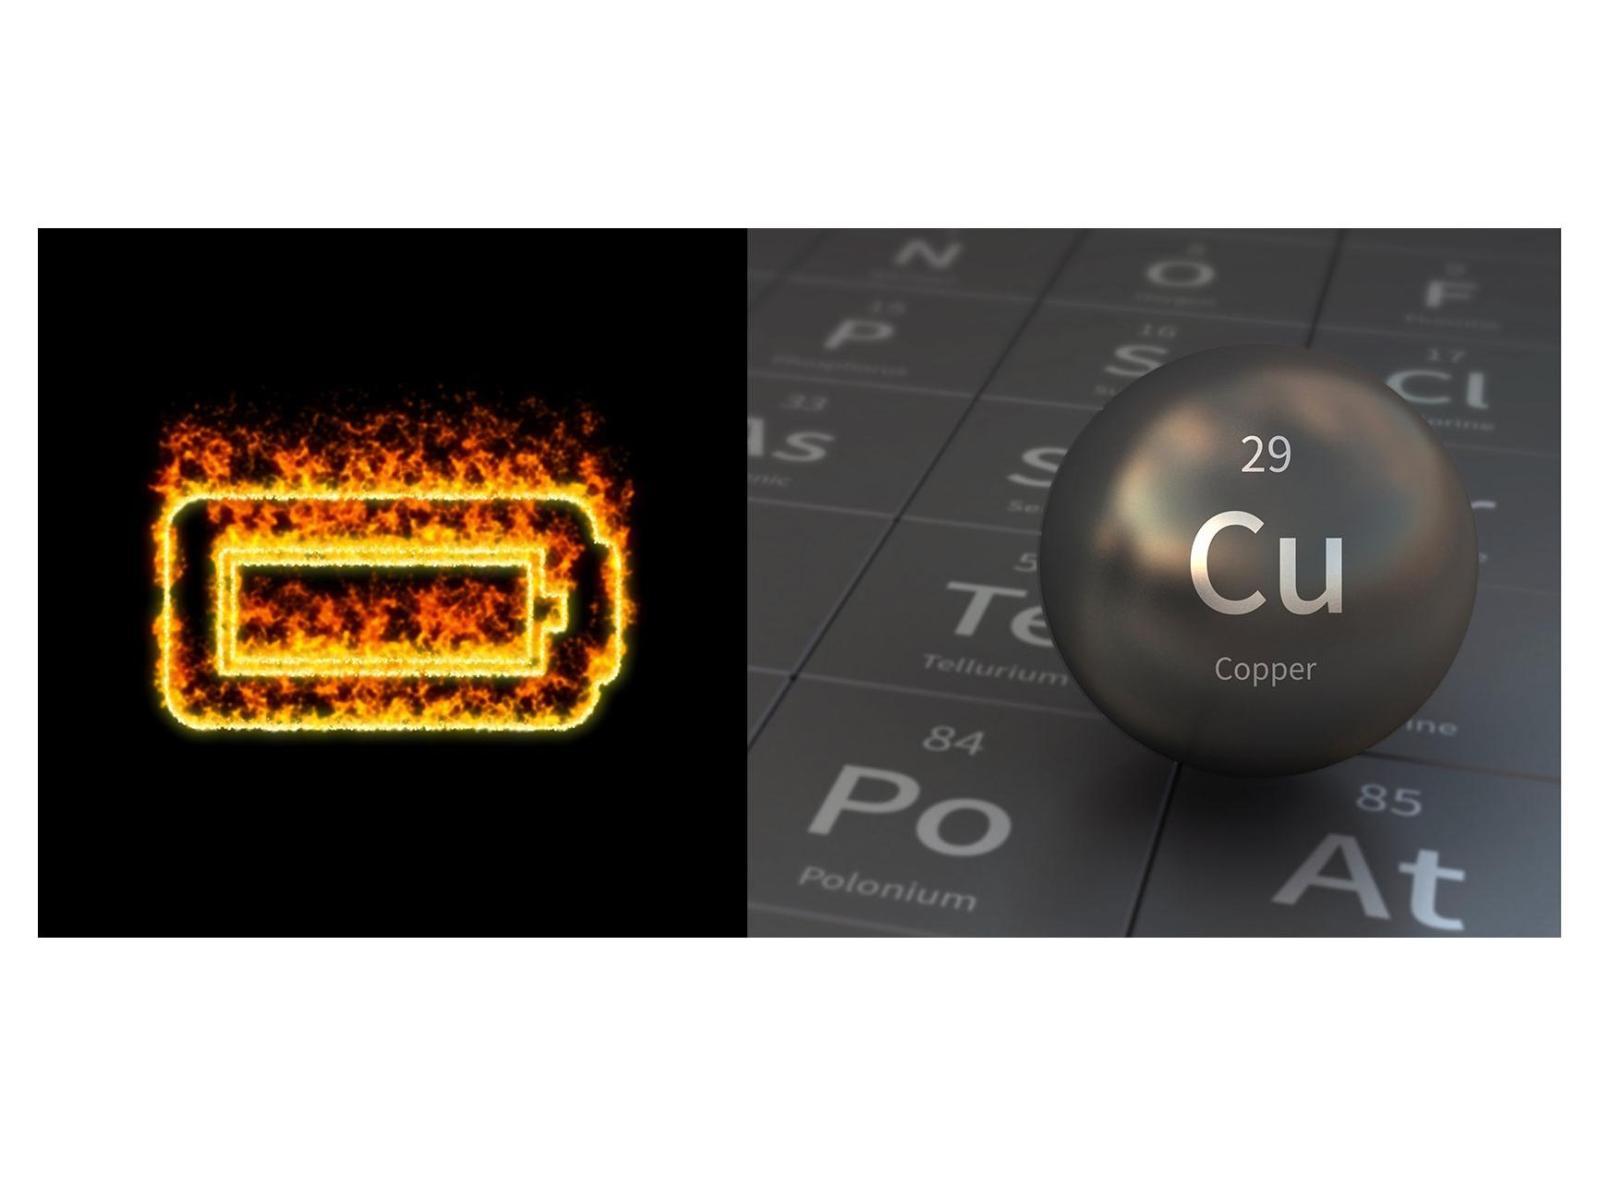 Abstract of a battery on fire and the elemental copper.